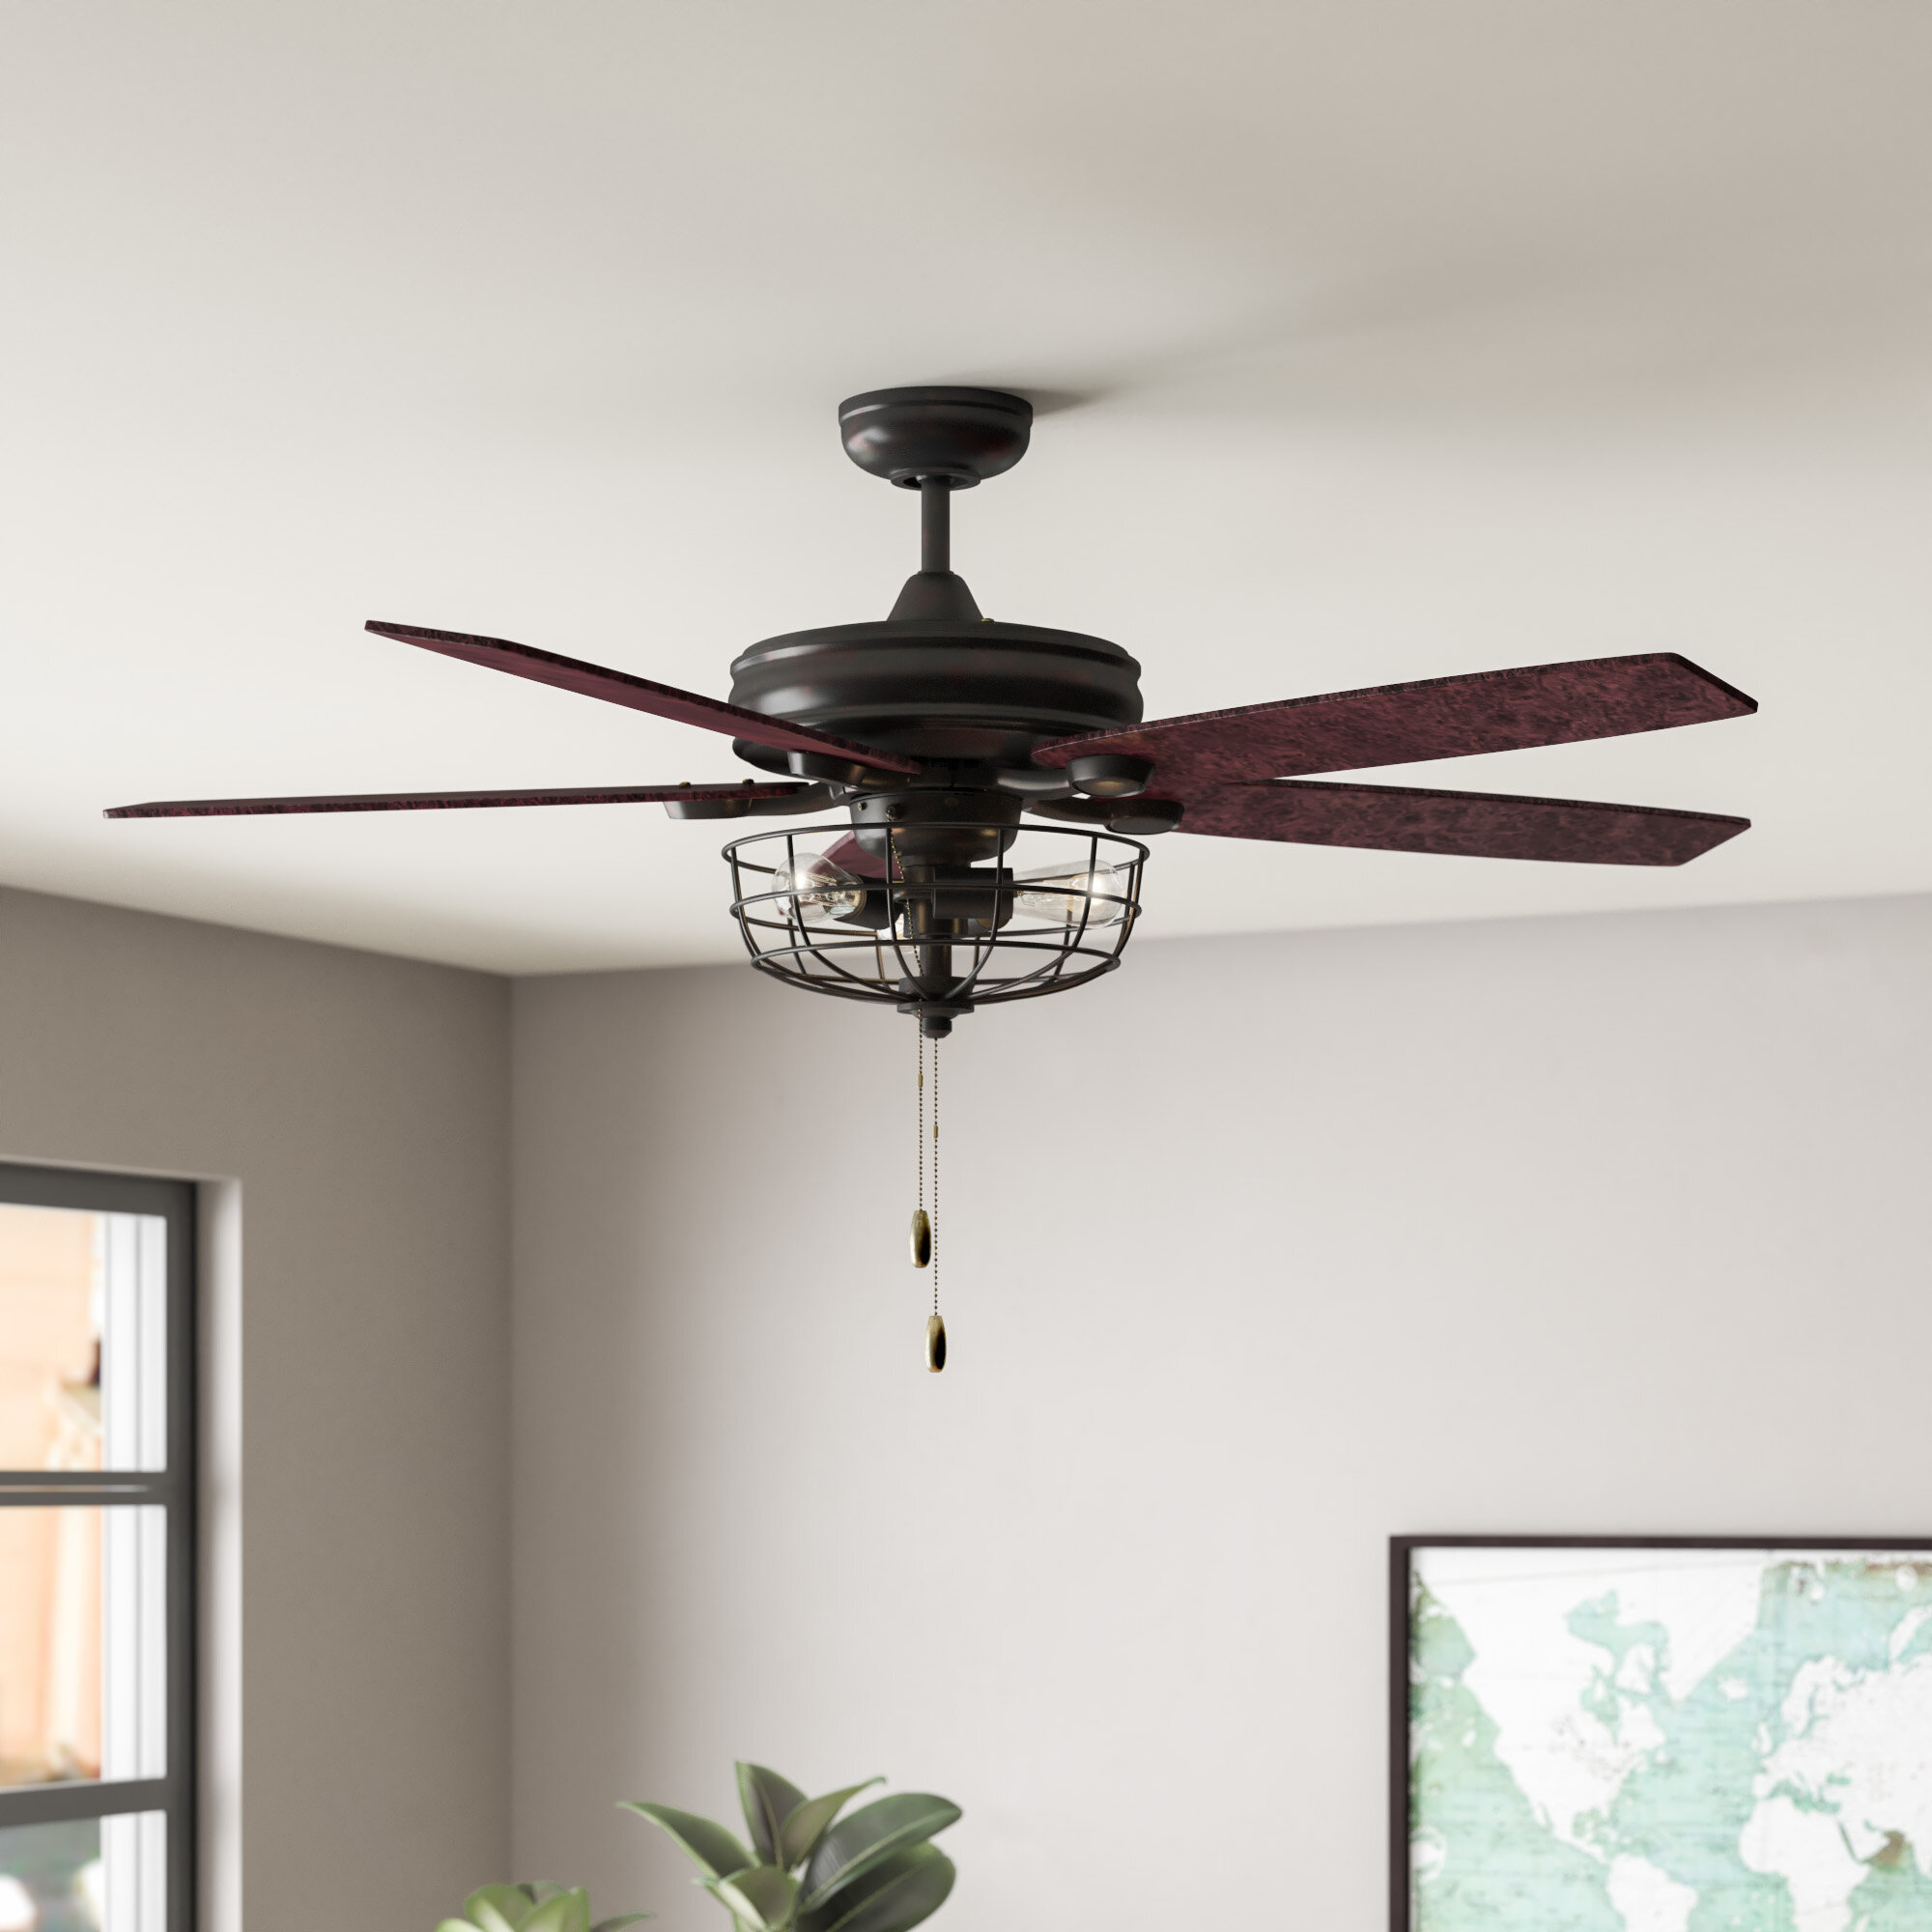 Industrial Lodge Home 52 Hartwick 5 Blade Caged Ceiling Fan With Pull Chain And Light Kit Included Reviews Wayfair